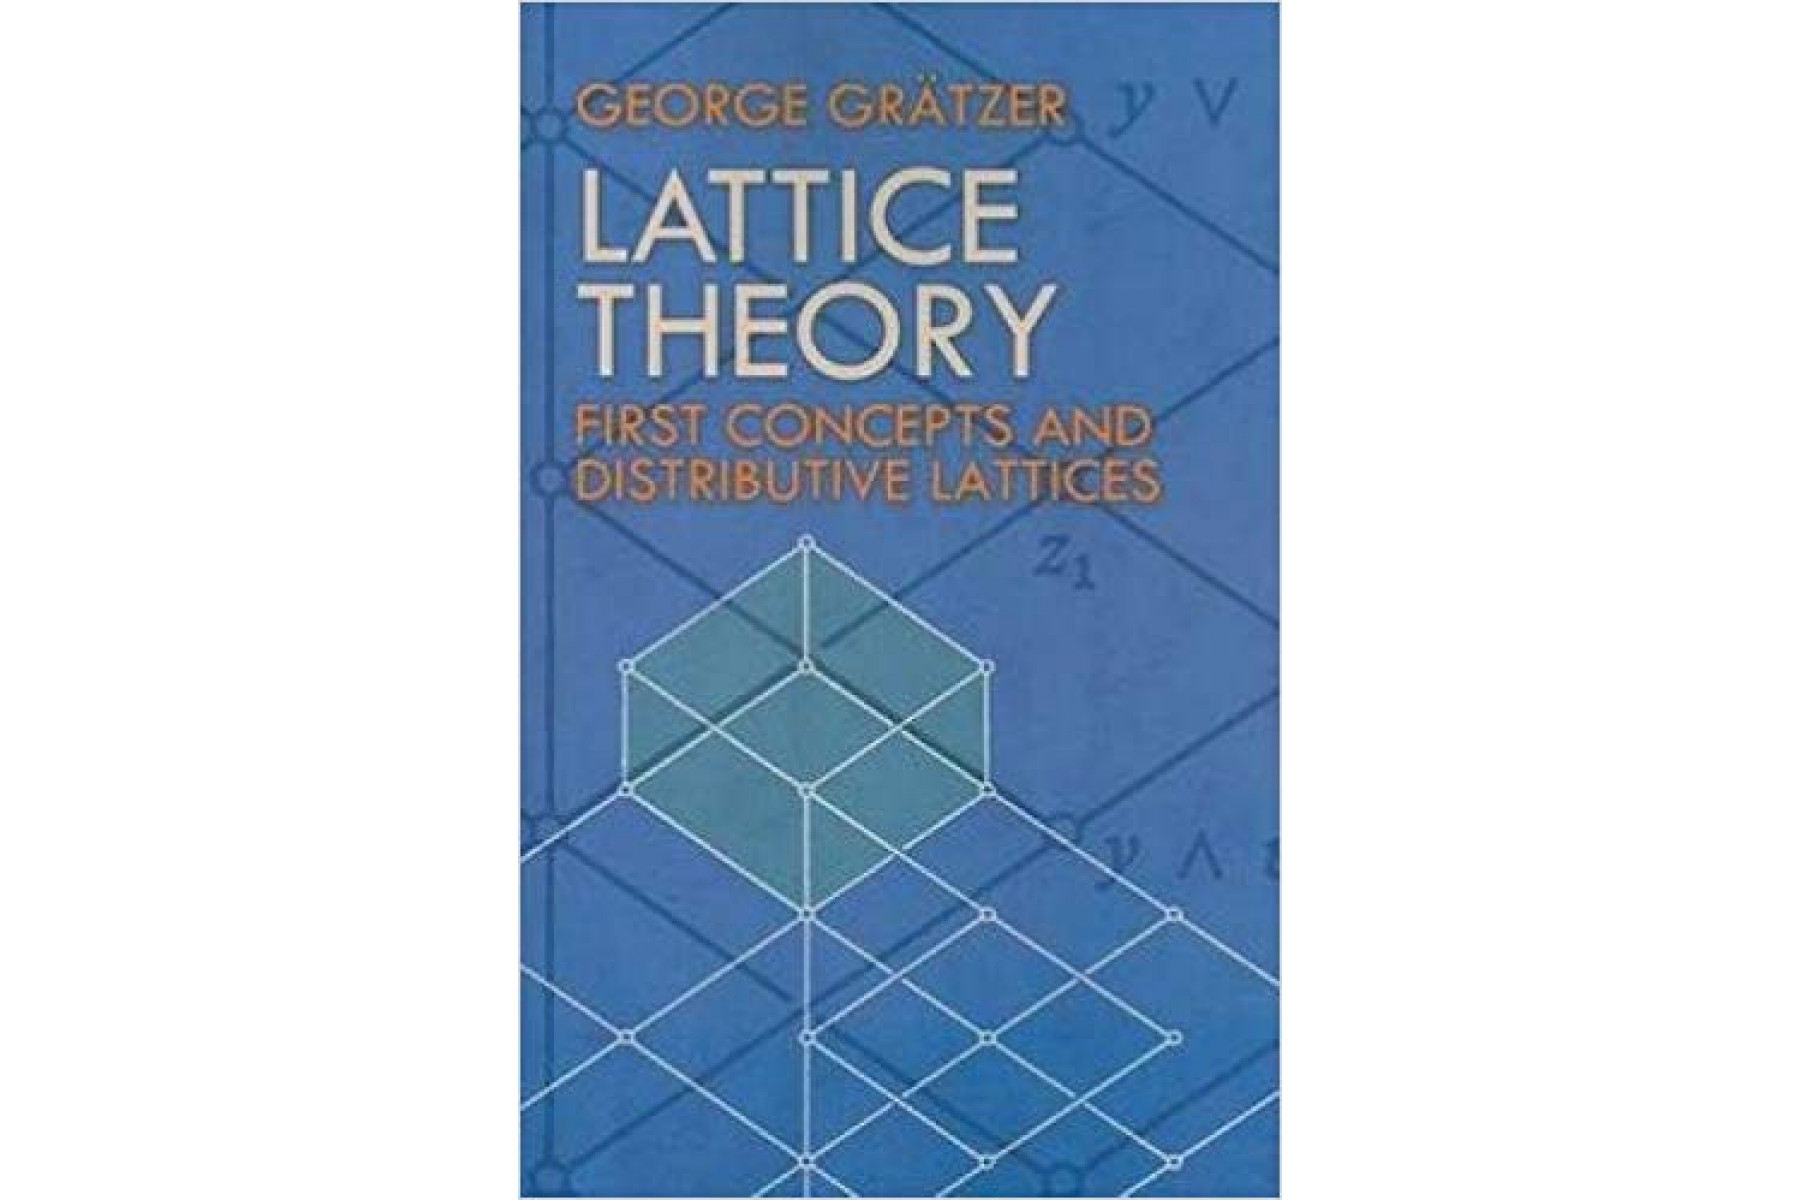 Lattice Theory: First Concepts and Distributive Lattices